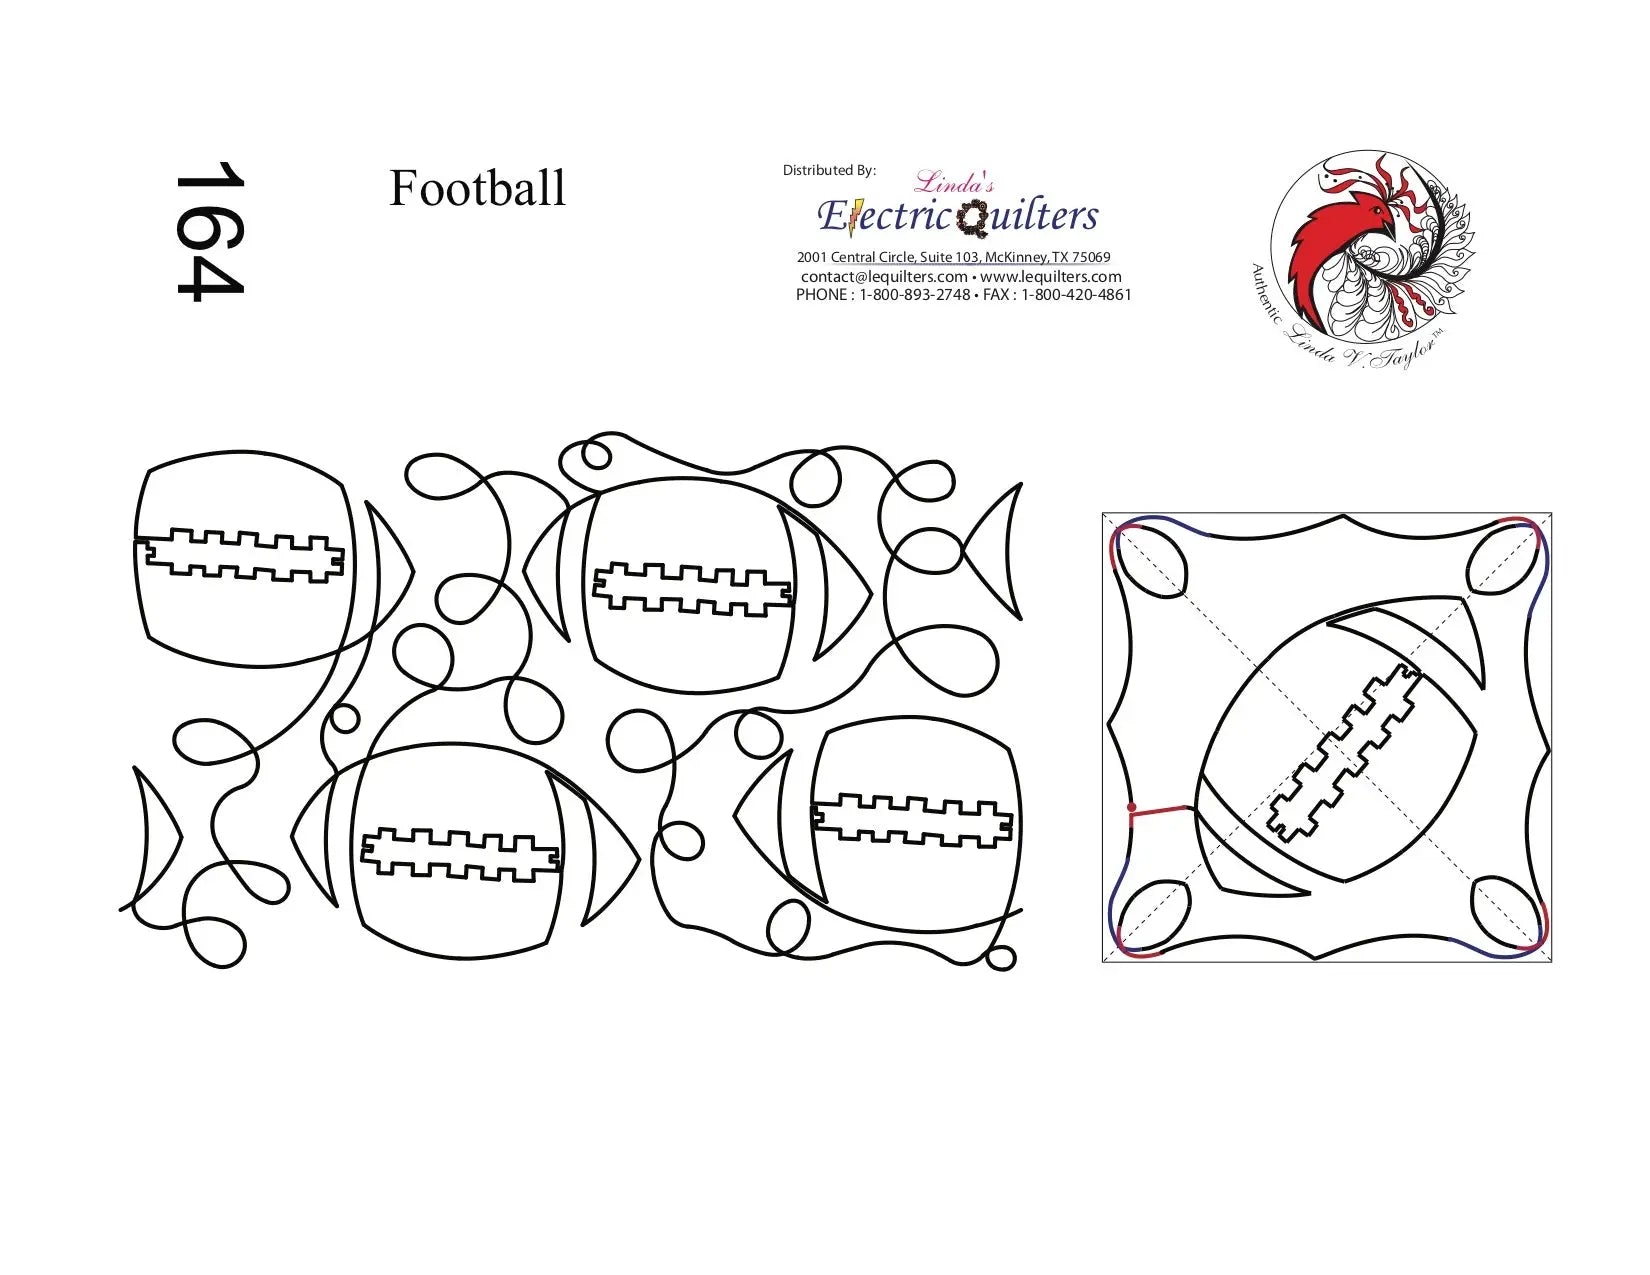 164 Football Pantograph by Linda V. Taylor - Linda's Electric Quilters